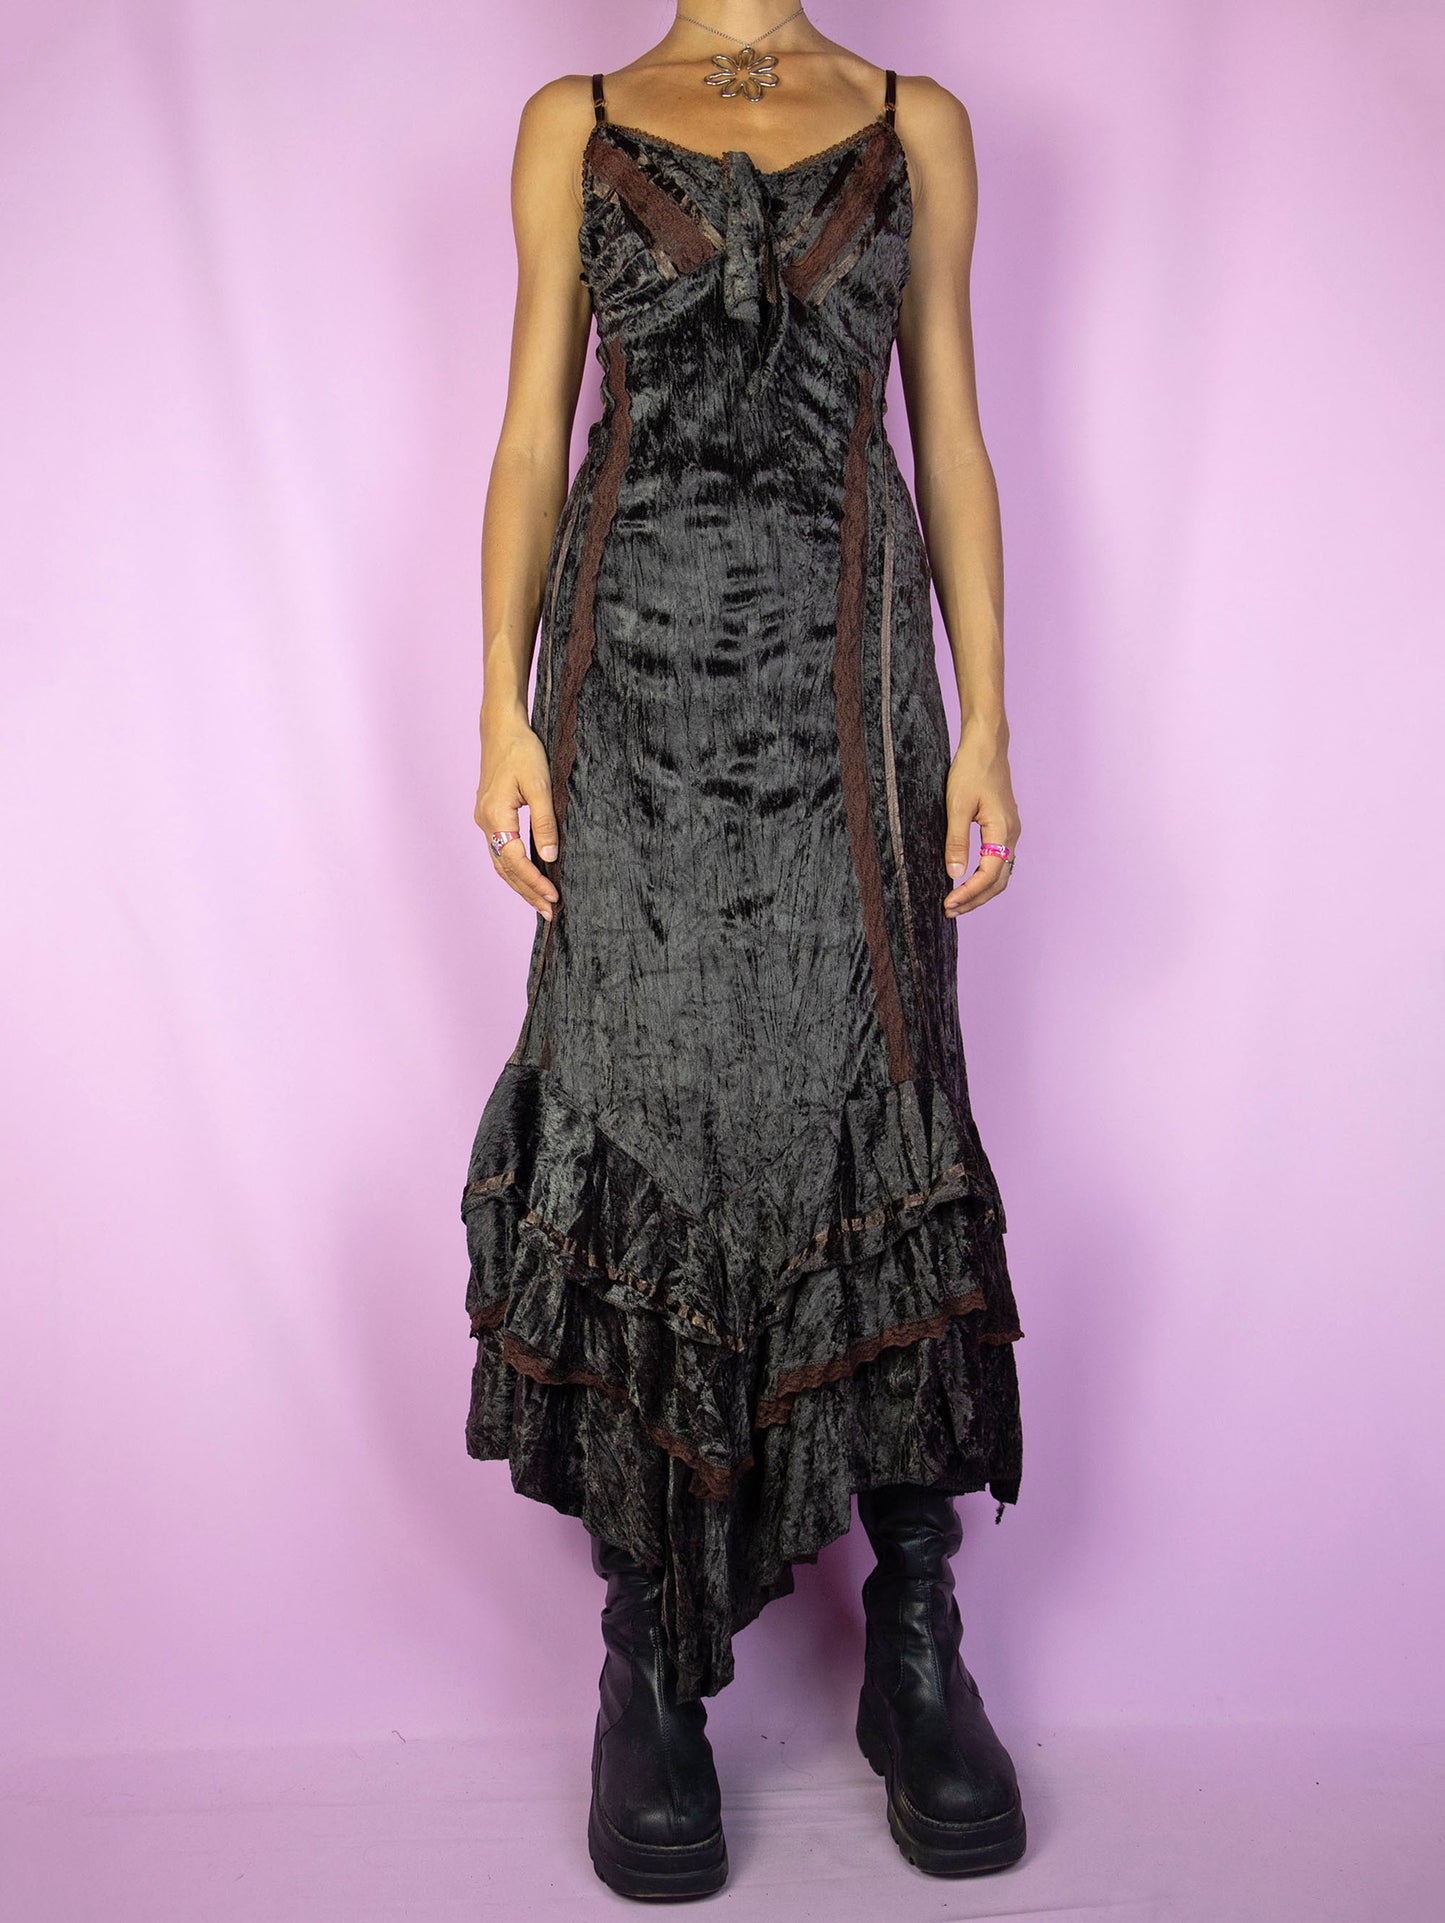 The Vintage 90s Brown Velvet Maxi Dress is a dark brown dress with adjustable straps, a tied v-neck, asymmetrical ruffled hem, lace details, and a lace-up tied back. Fairy grunge whimsygoth style 1990s evening party midi dress.